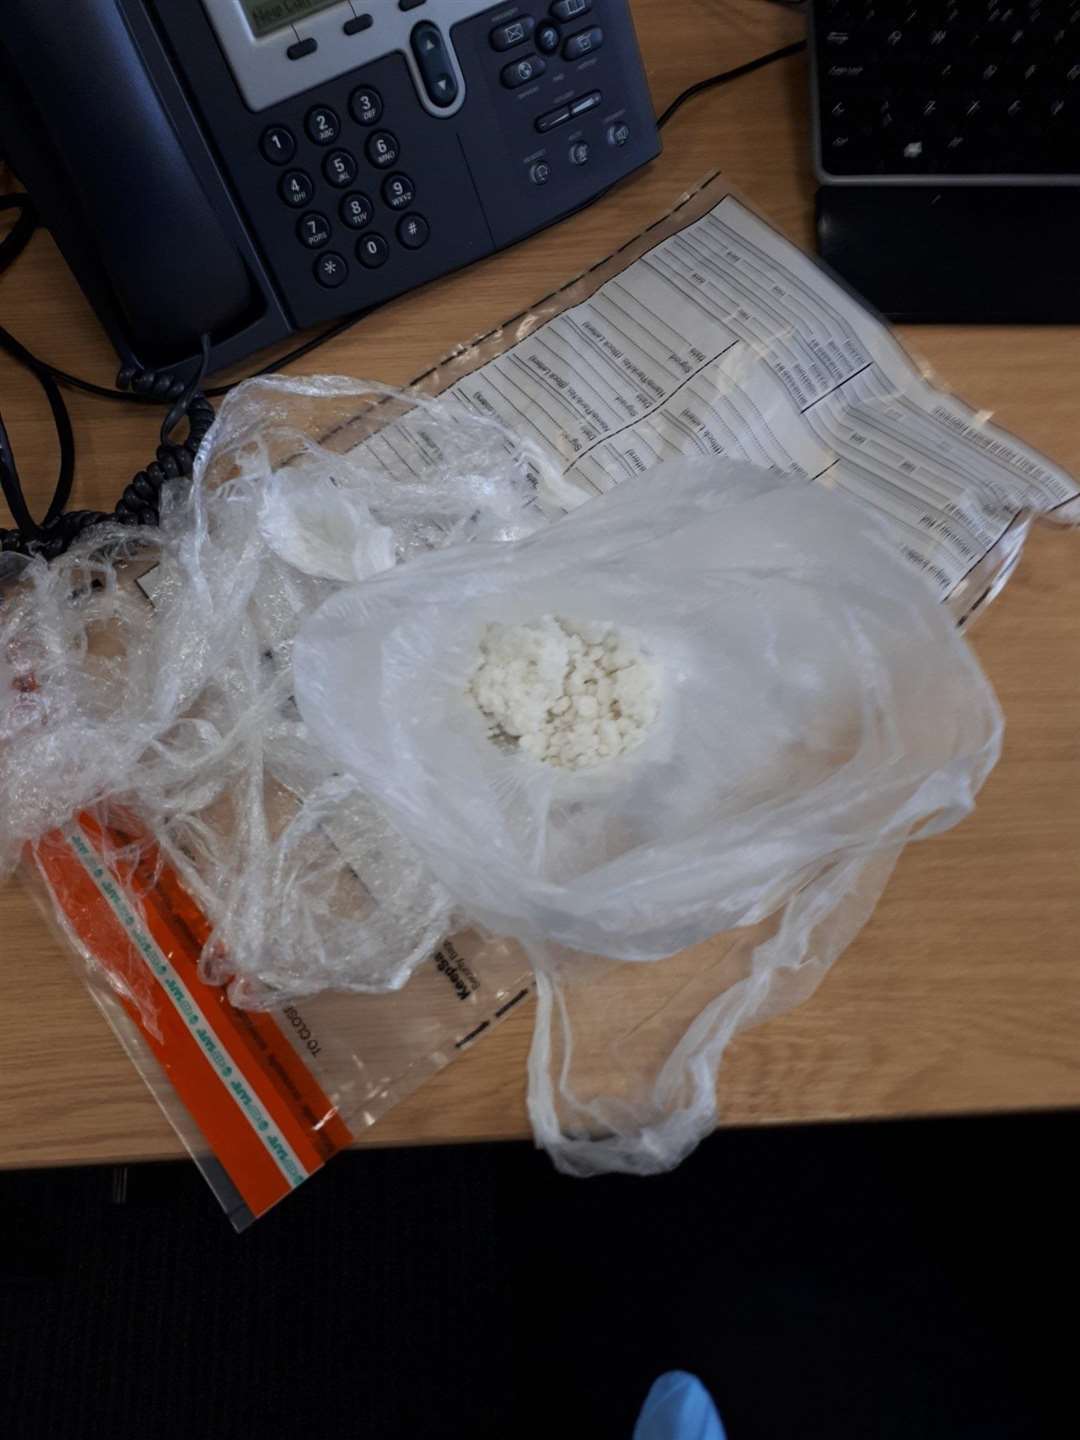 Gravesham Police tweeted this picture after seizing drugs during a vehicle check (7184353)